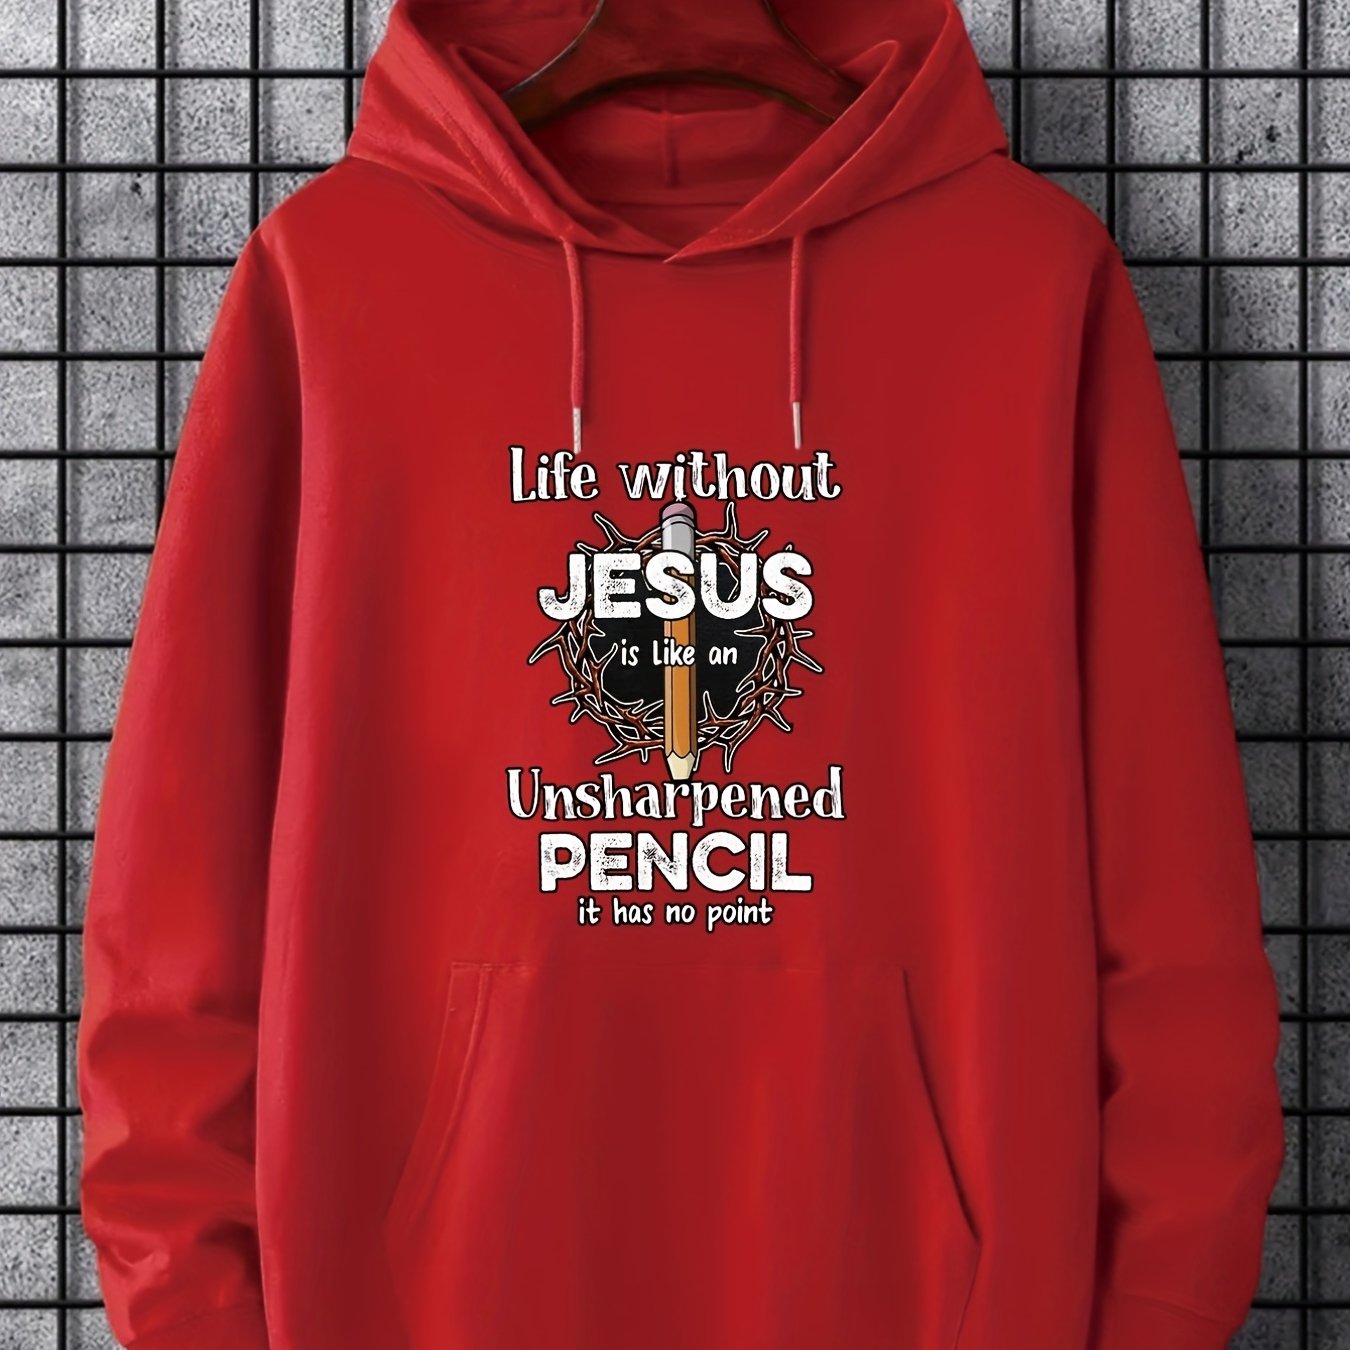 Life Without JESUS Is Like An Unsharpened Pencil: It Has No Point Men's Christian Pullover Hooded Sweatshirt claimedbygoddesigns